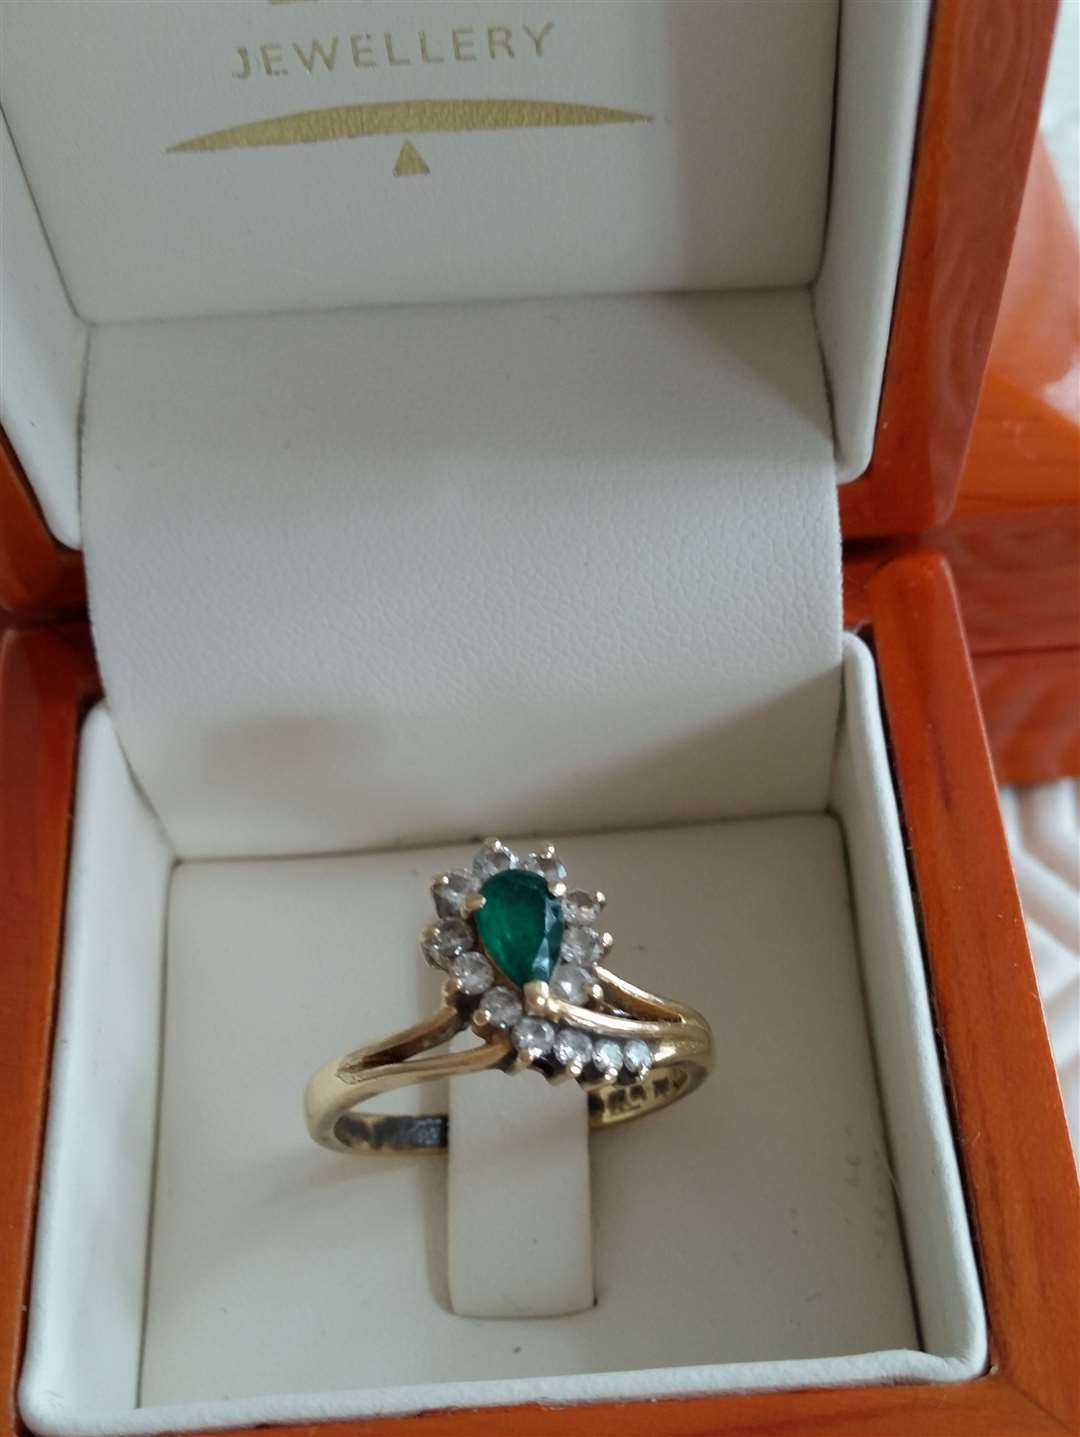 The ring stolen during the break-in in Paddock Wood Picture: Kent Police